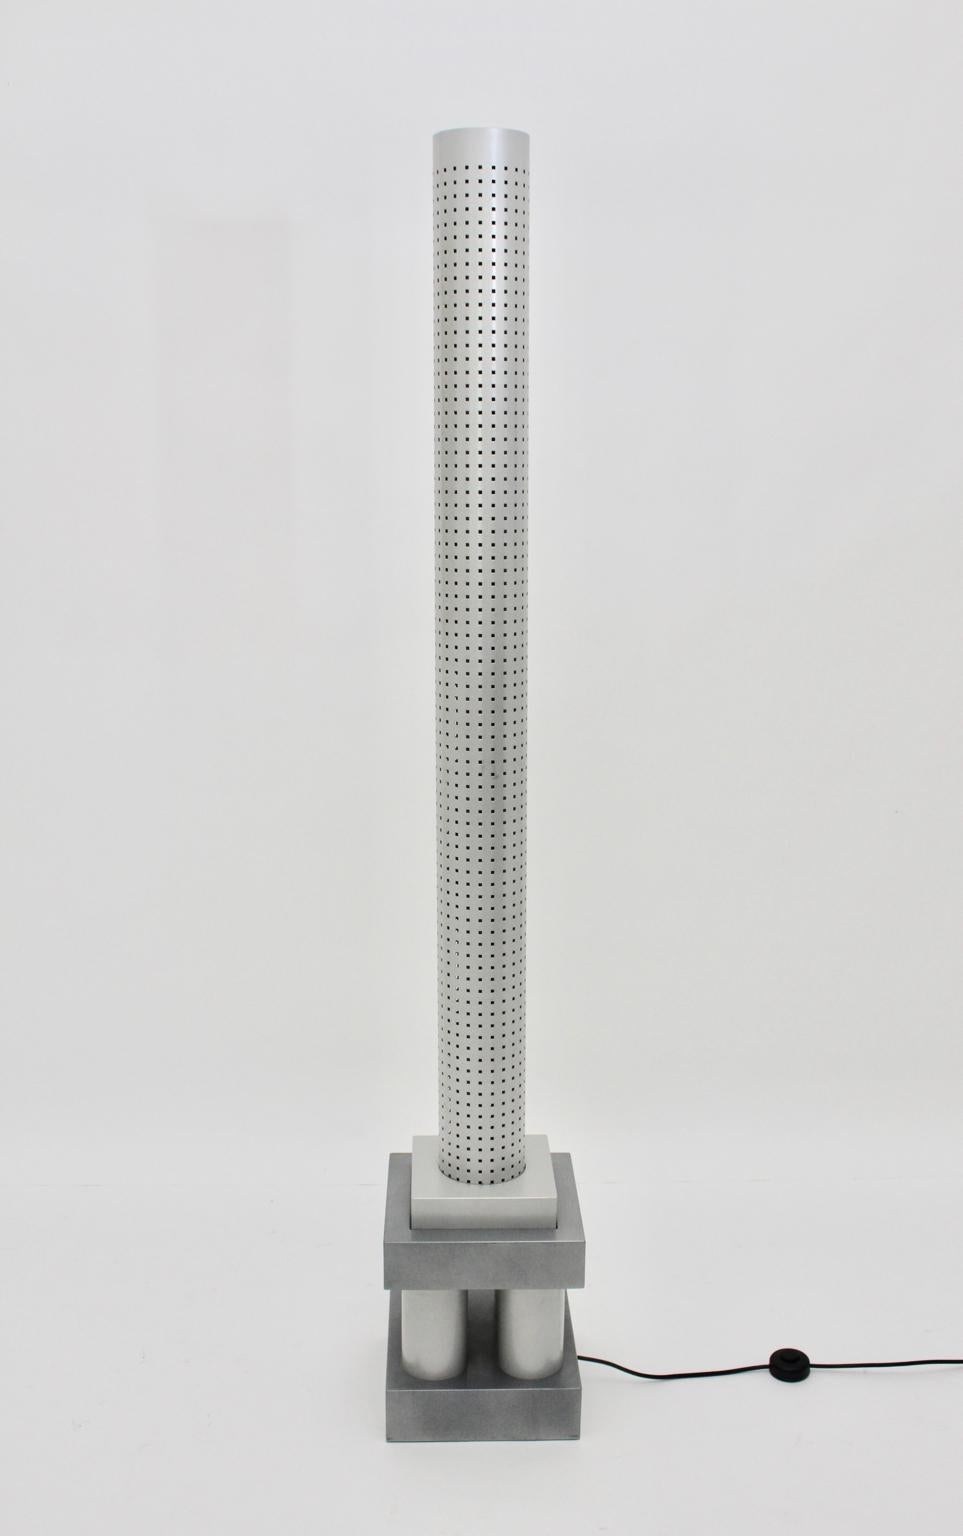 Modern sculptural floor lamp model Chicago Tribune designed by Matteo Thun 1985 for Bieffeplast Padua, Italy.
The floor lamp consists of grey and silver enameled metal and a perforated shade.
Three neon tubes illuminate this floor lamp.
The